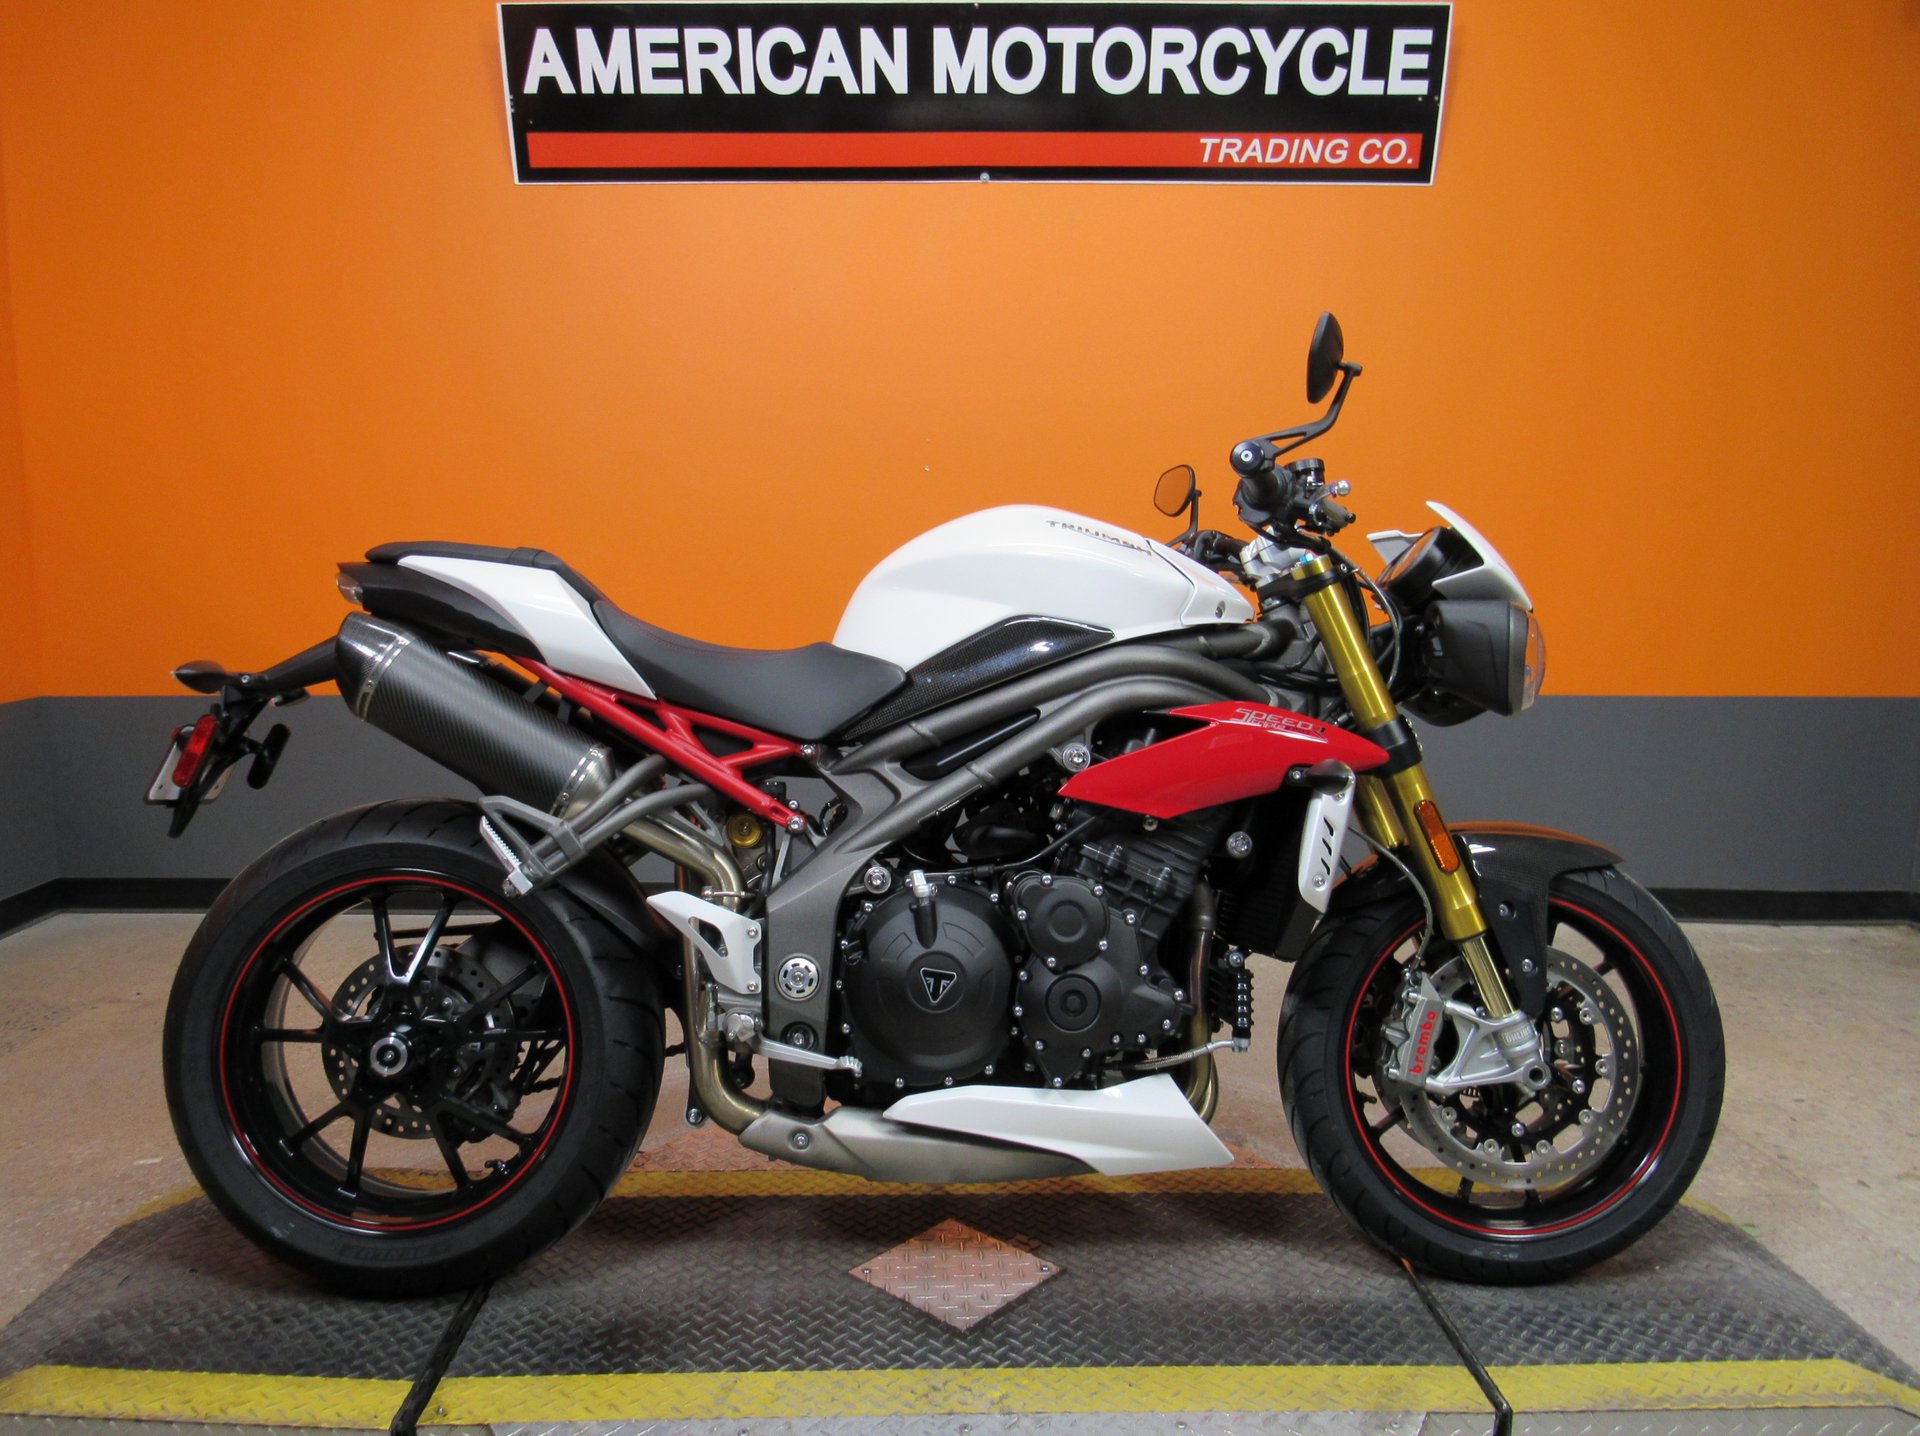 2016 Triumph Speed Triple R ABS | American Motorcycle Trading Company -  Used Harley Davidson Motorcycles